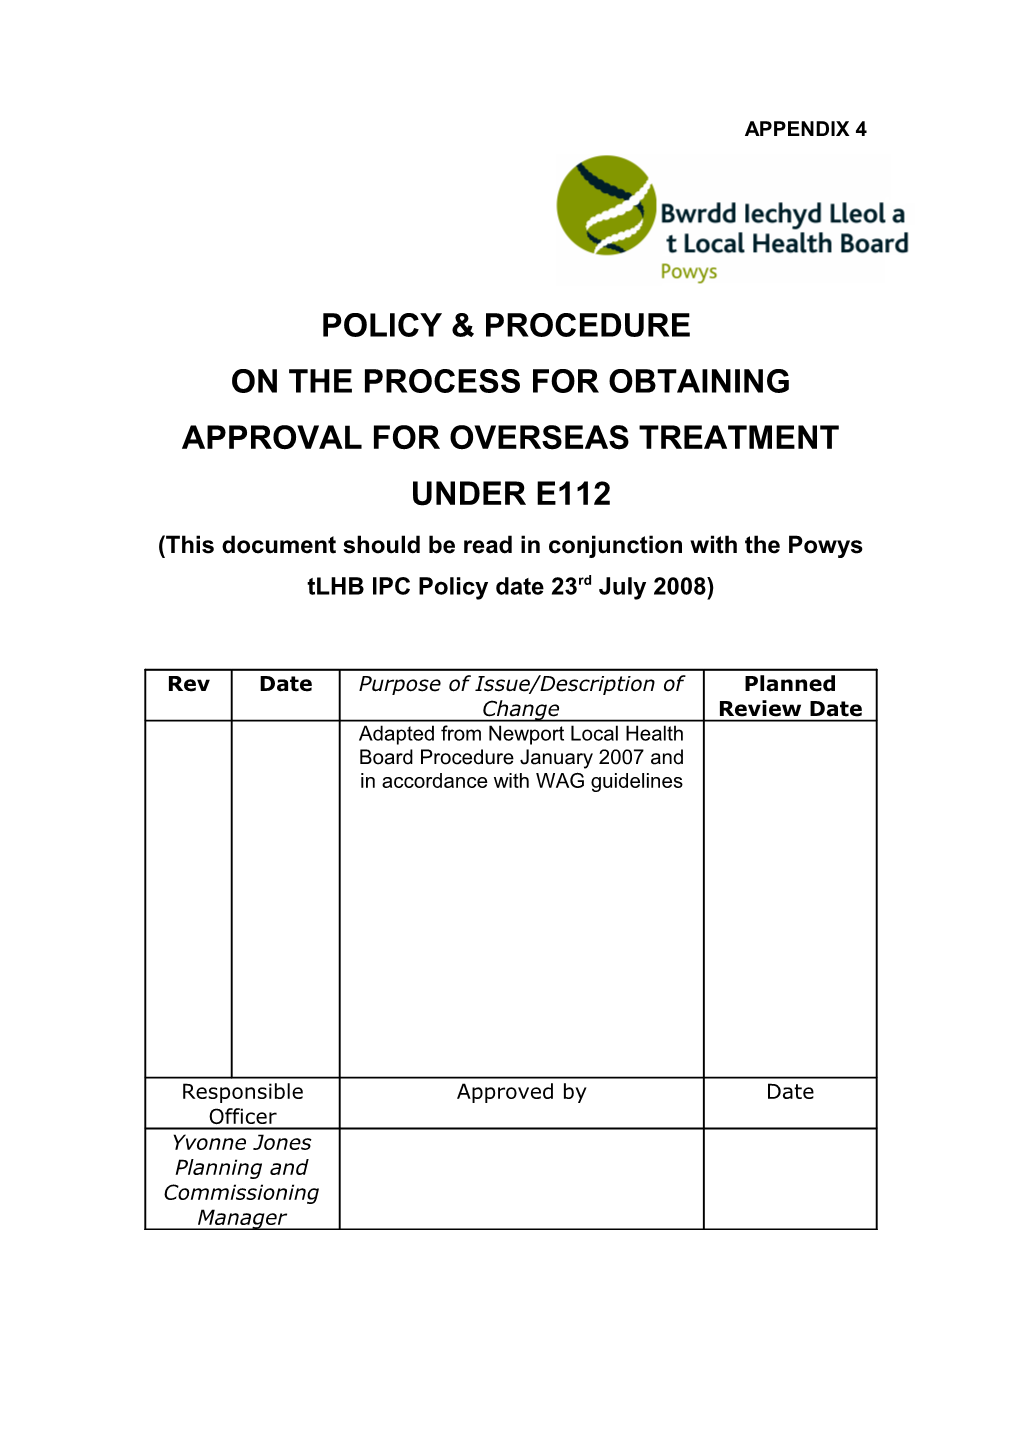 On the Process for Obtaining Approval for Overseas Treatment Under E112